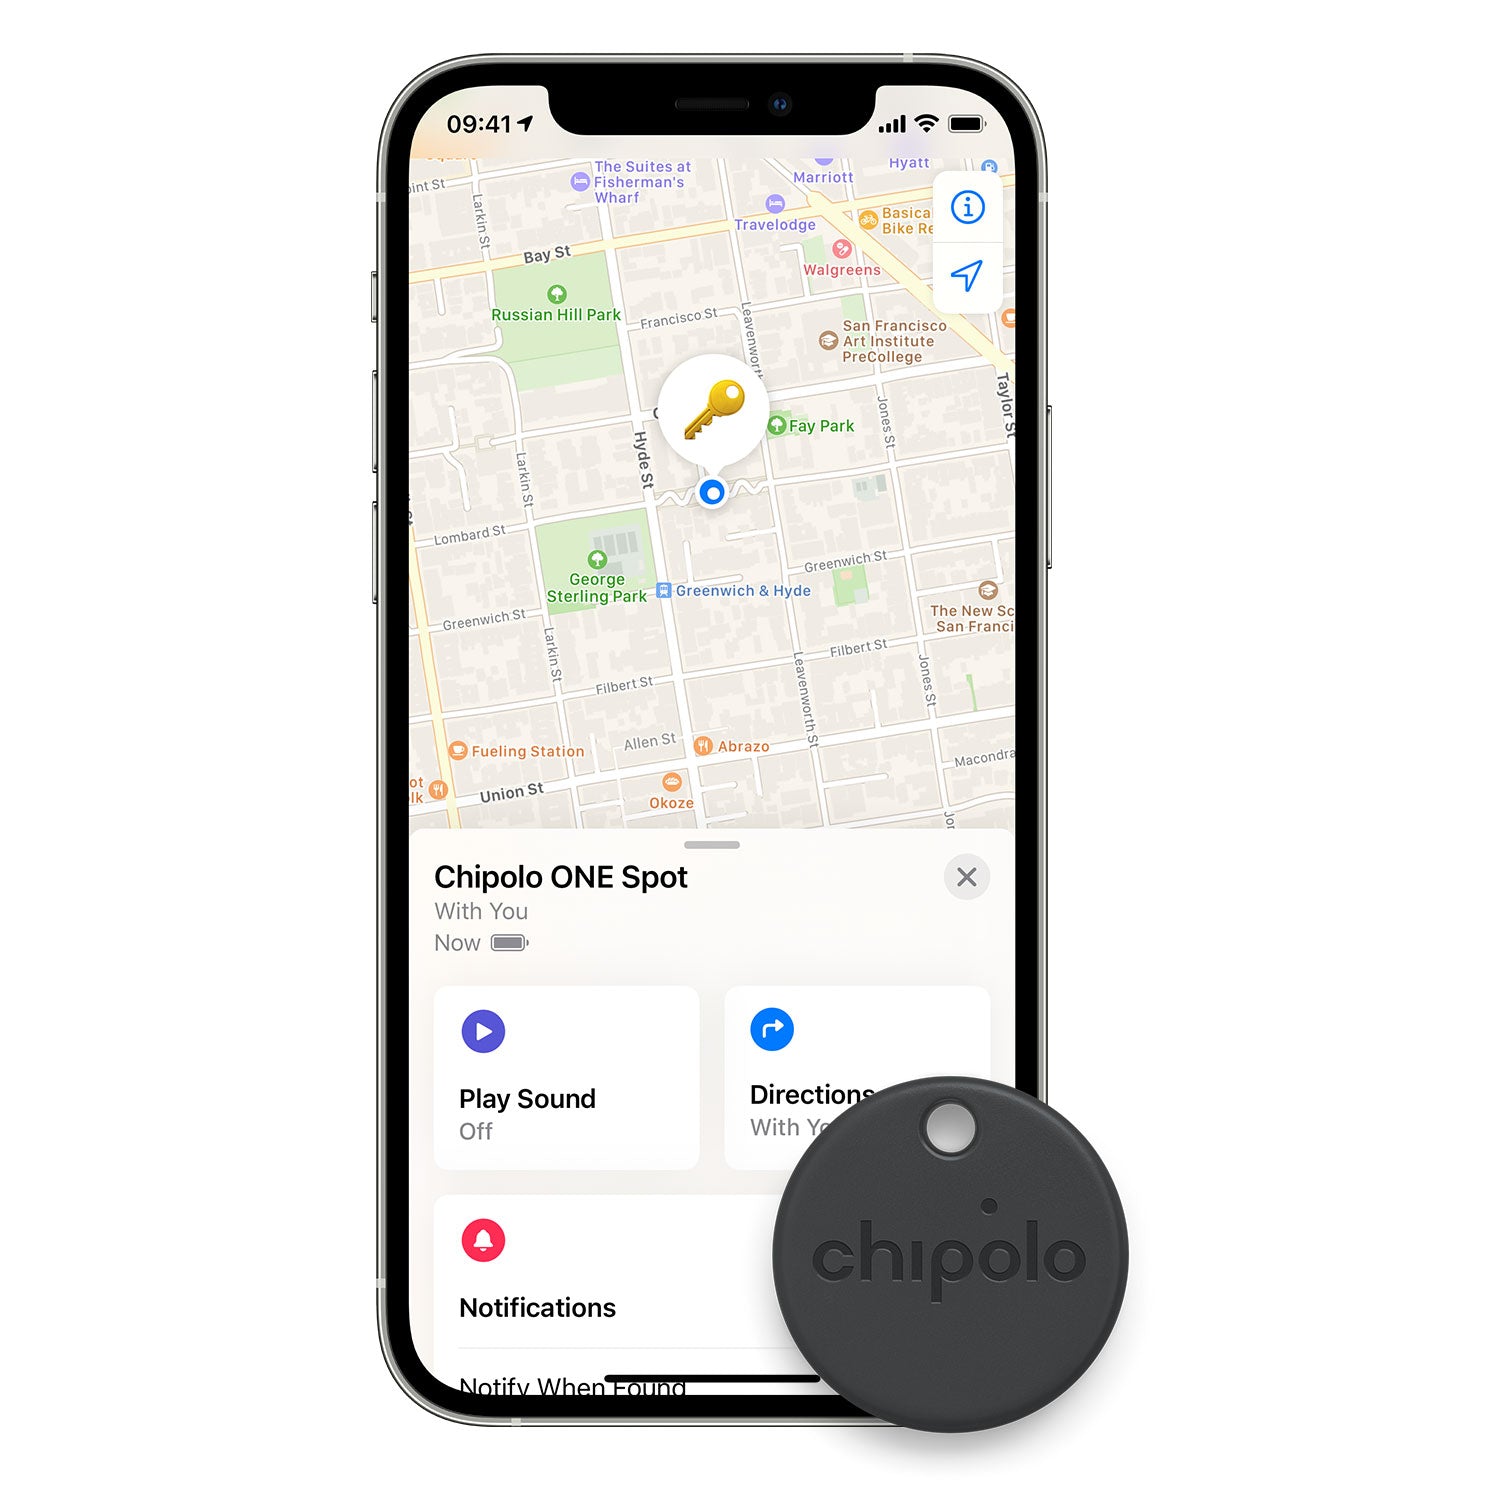 Chipolo CARD Spot - Works with the Apple Find My Network